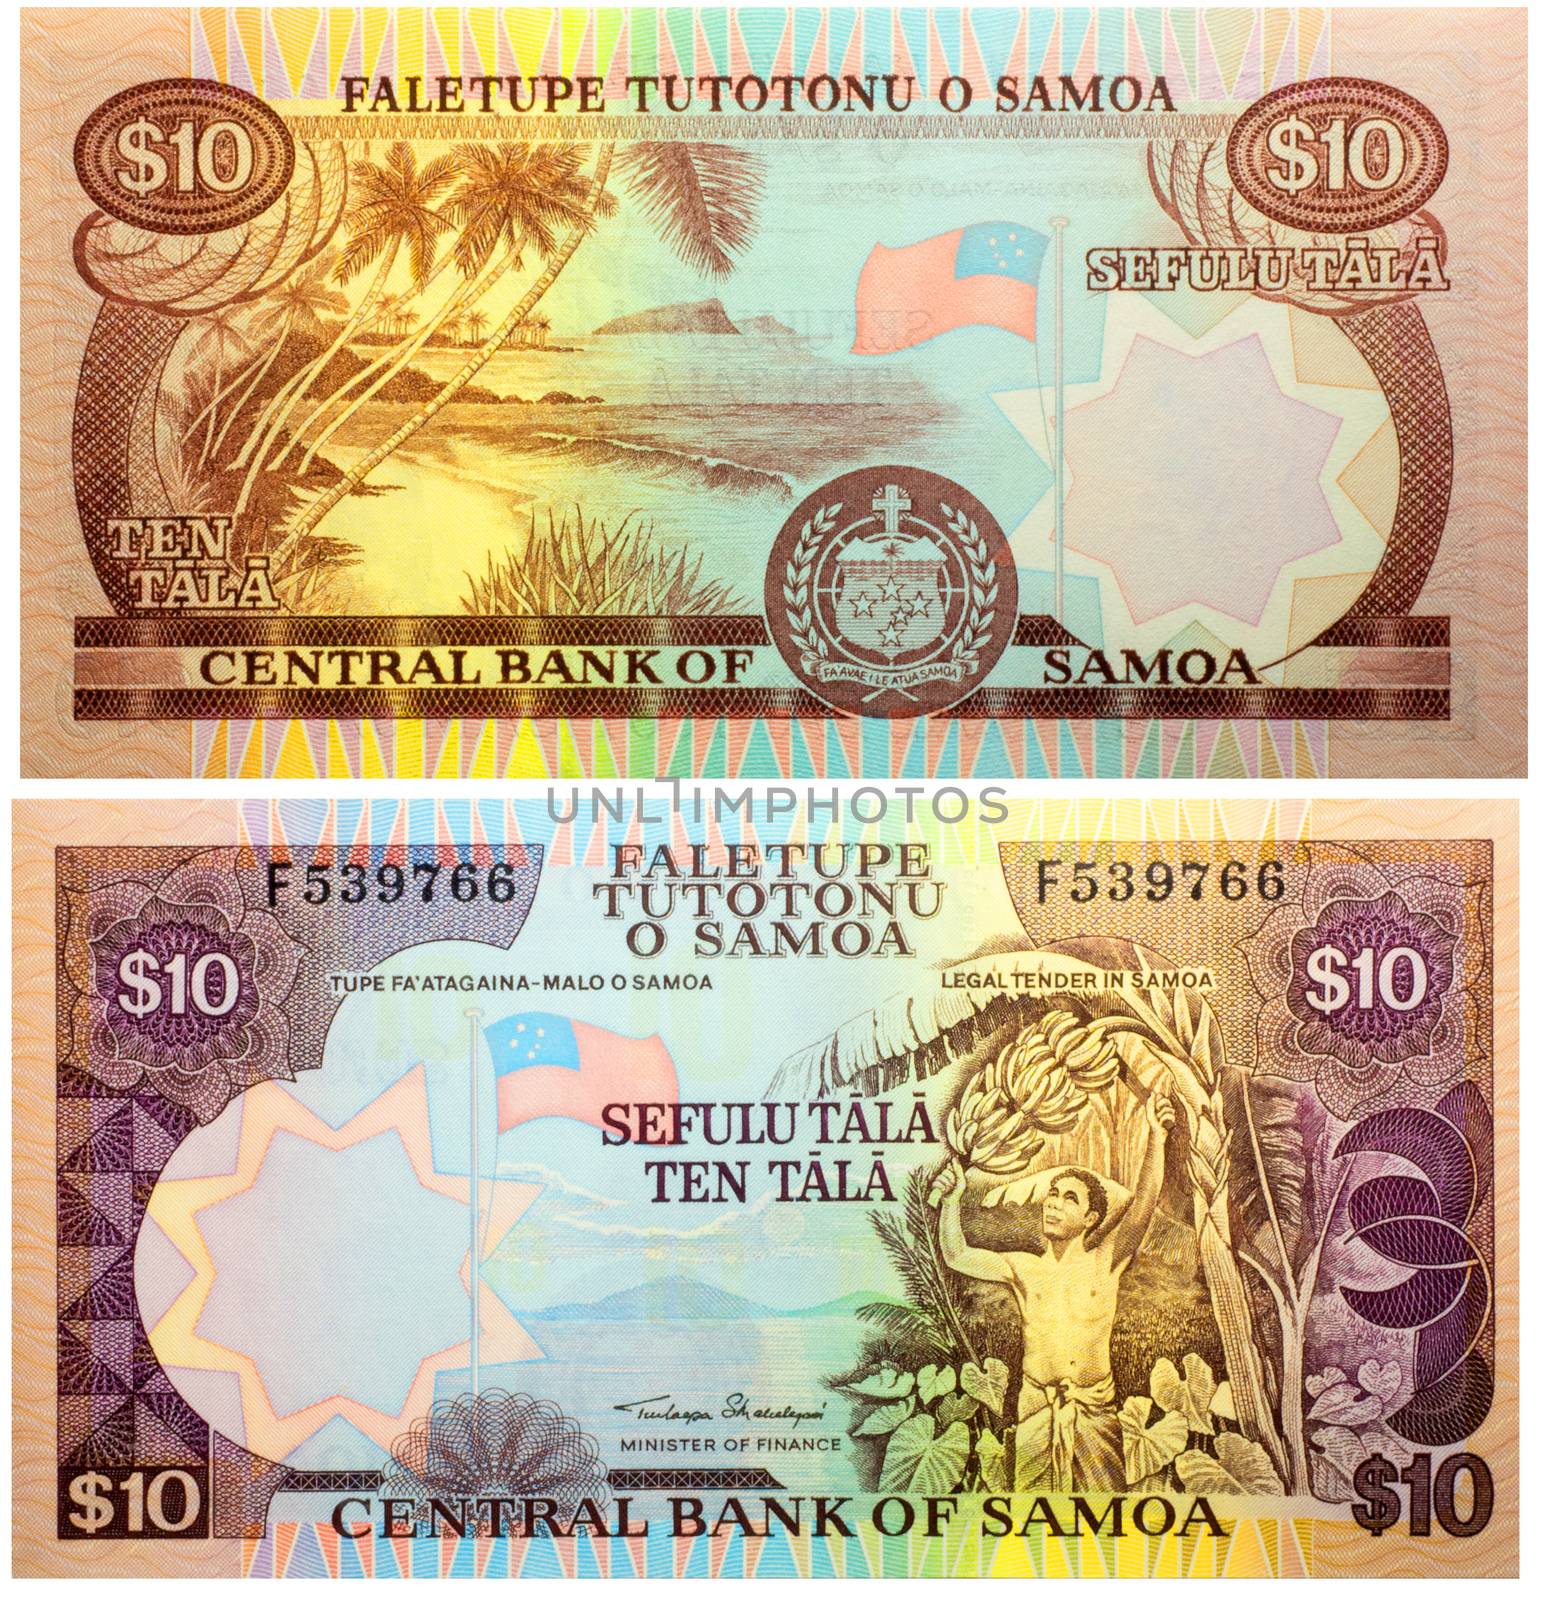 Banknote 10 tala Samoa front and back isolated on white emitted on 2002. Man picking bananas at right, national flag at left center. Back: Shoreline landscape, arms at lower center, national flag at center right